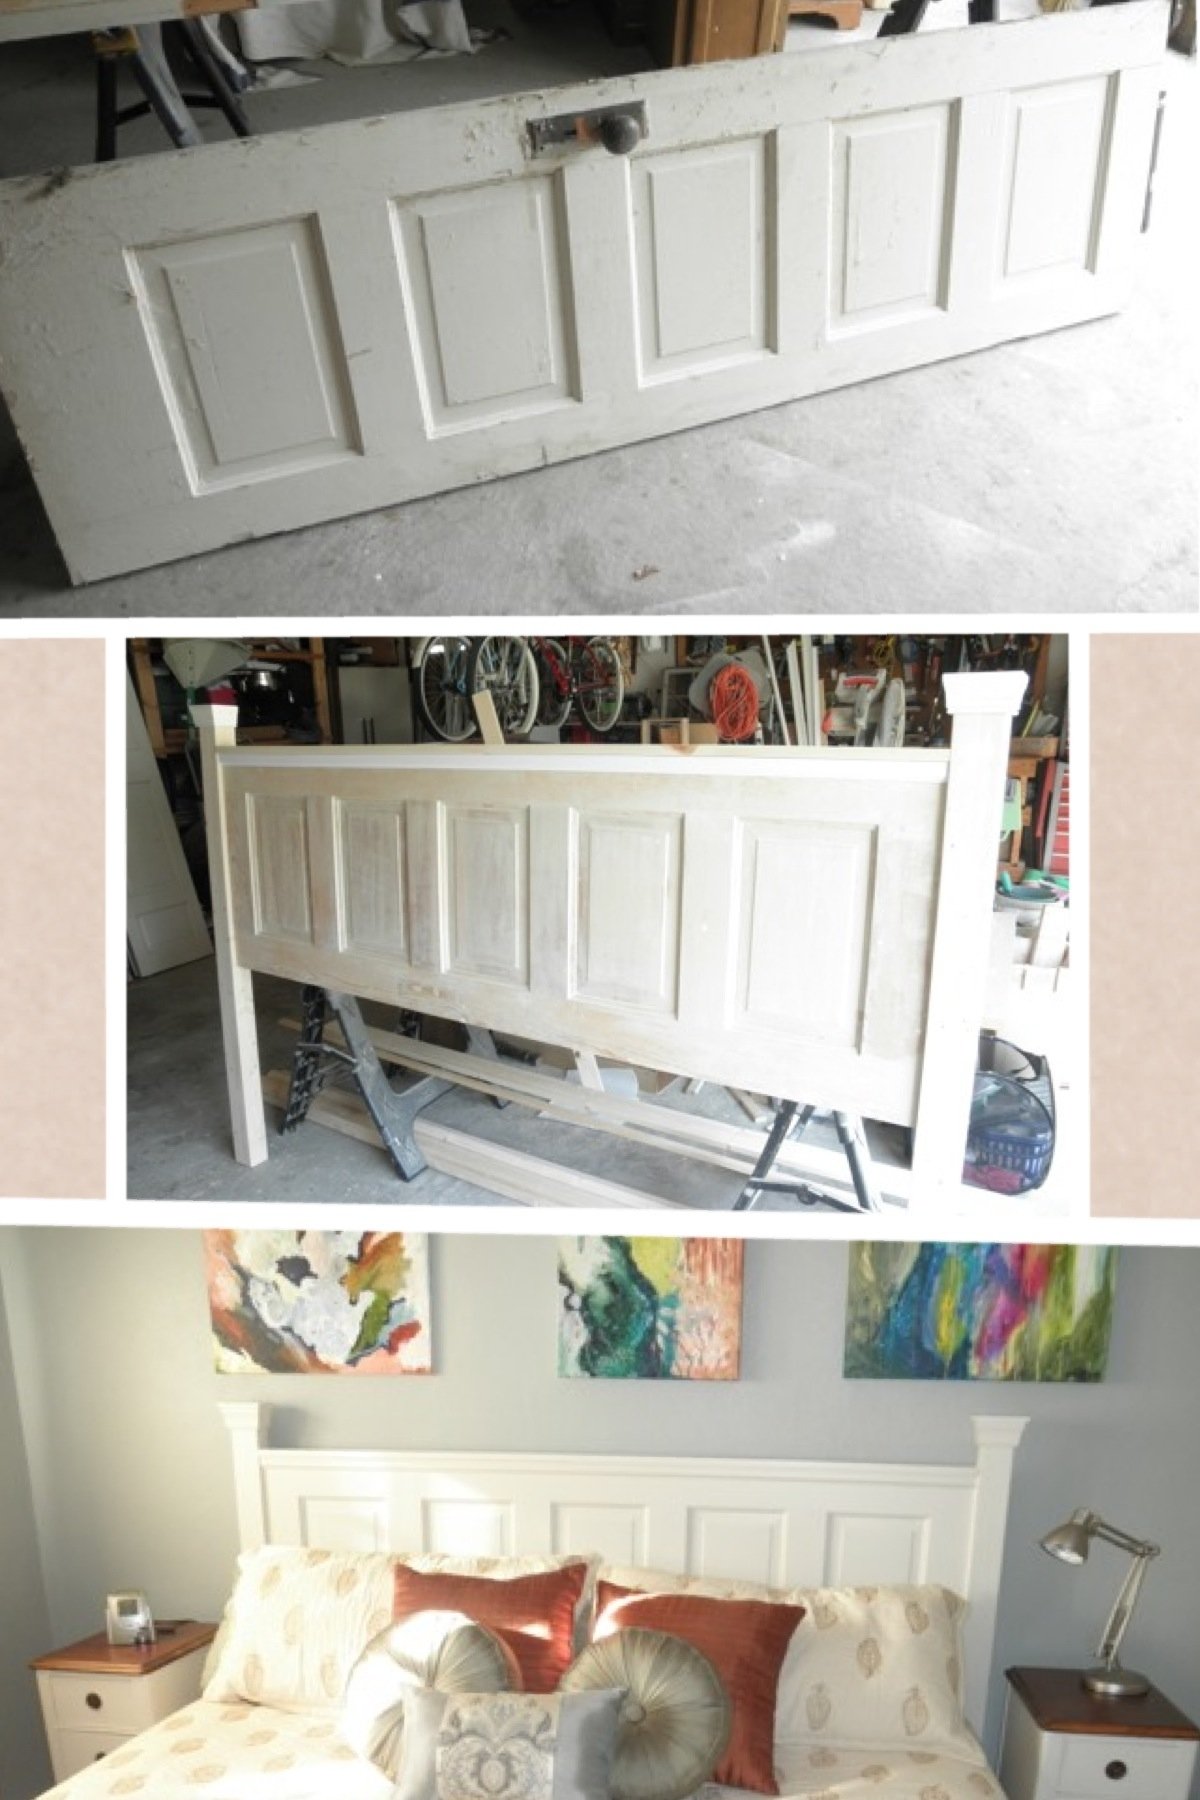 10 Elegant How To Make A King Size Headboard Ideas from old door to beautiful king sized headboard florida 1 2022